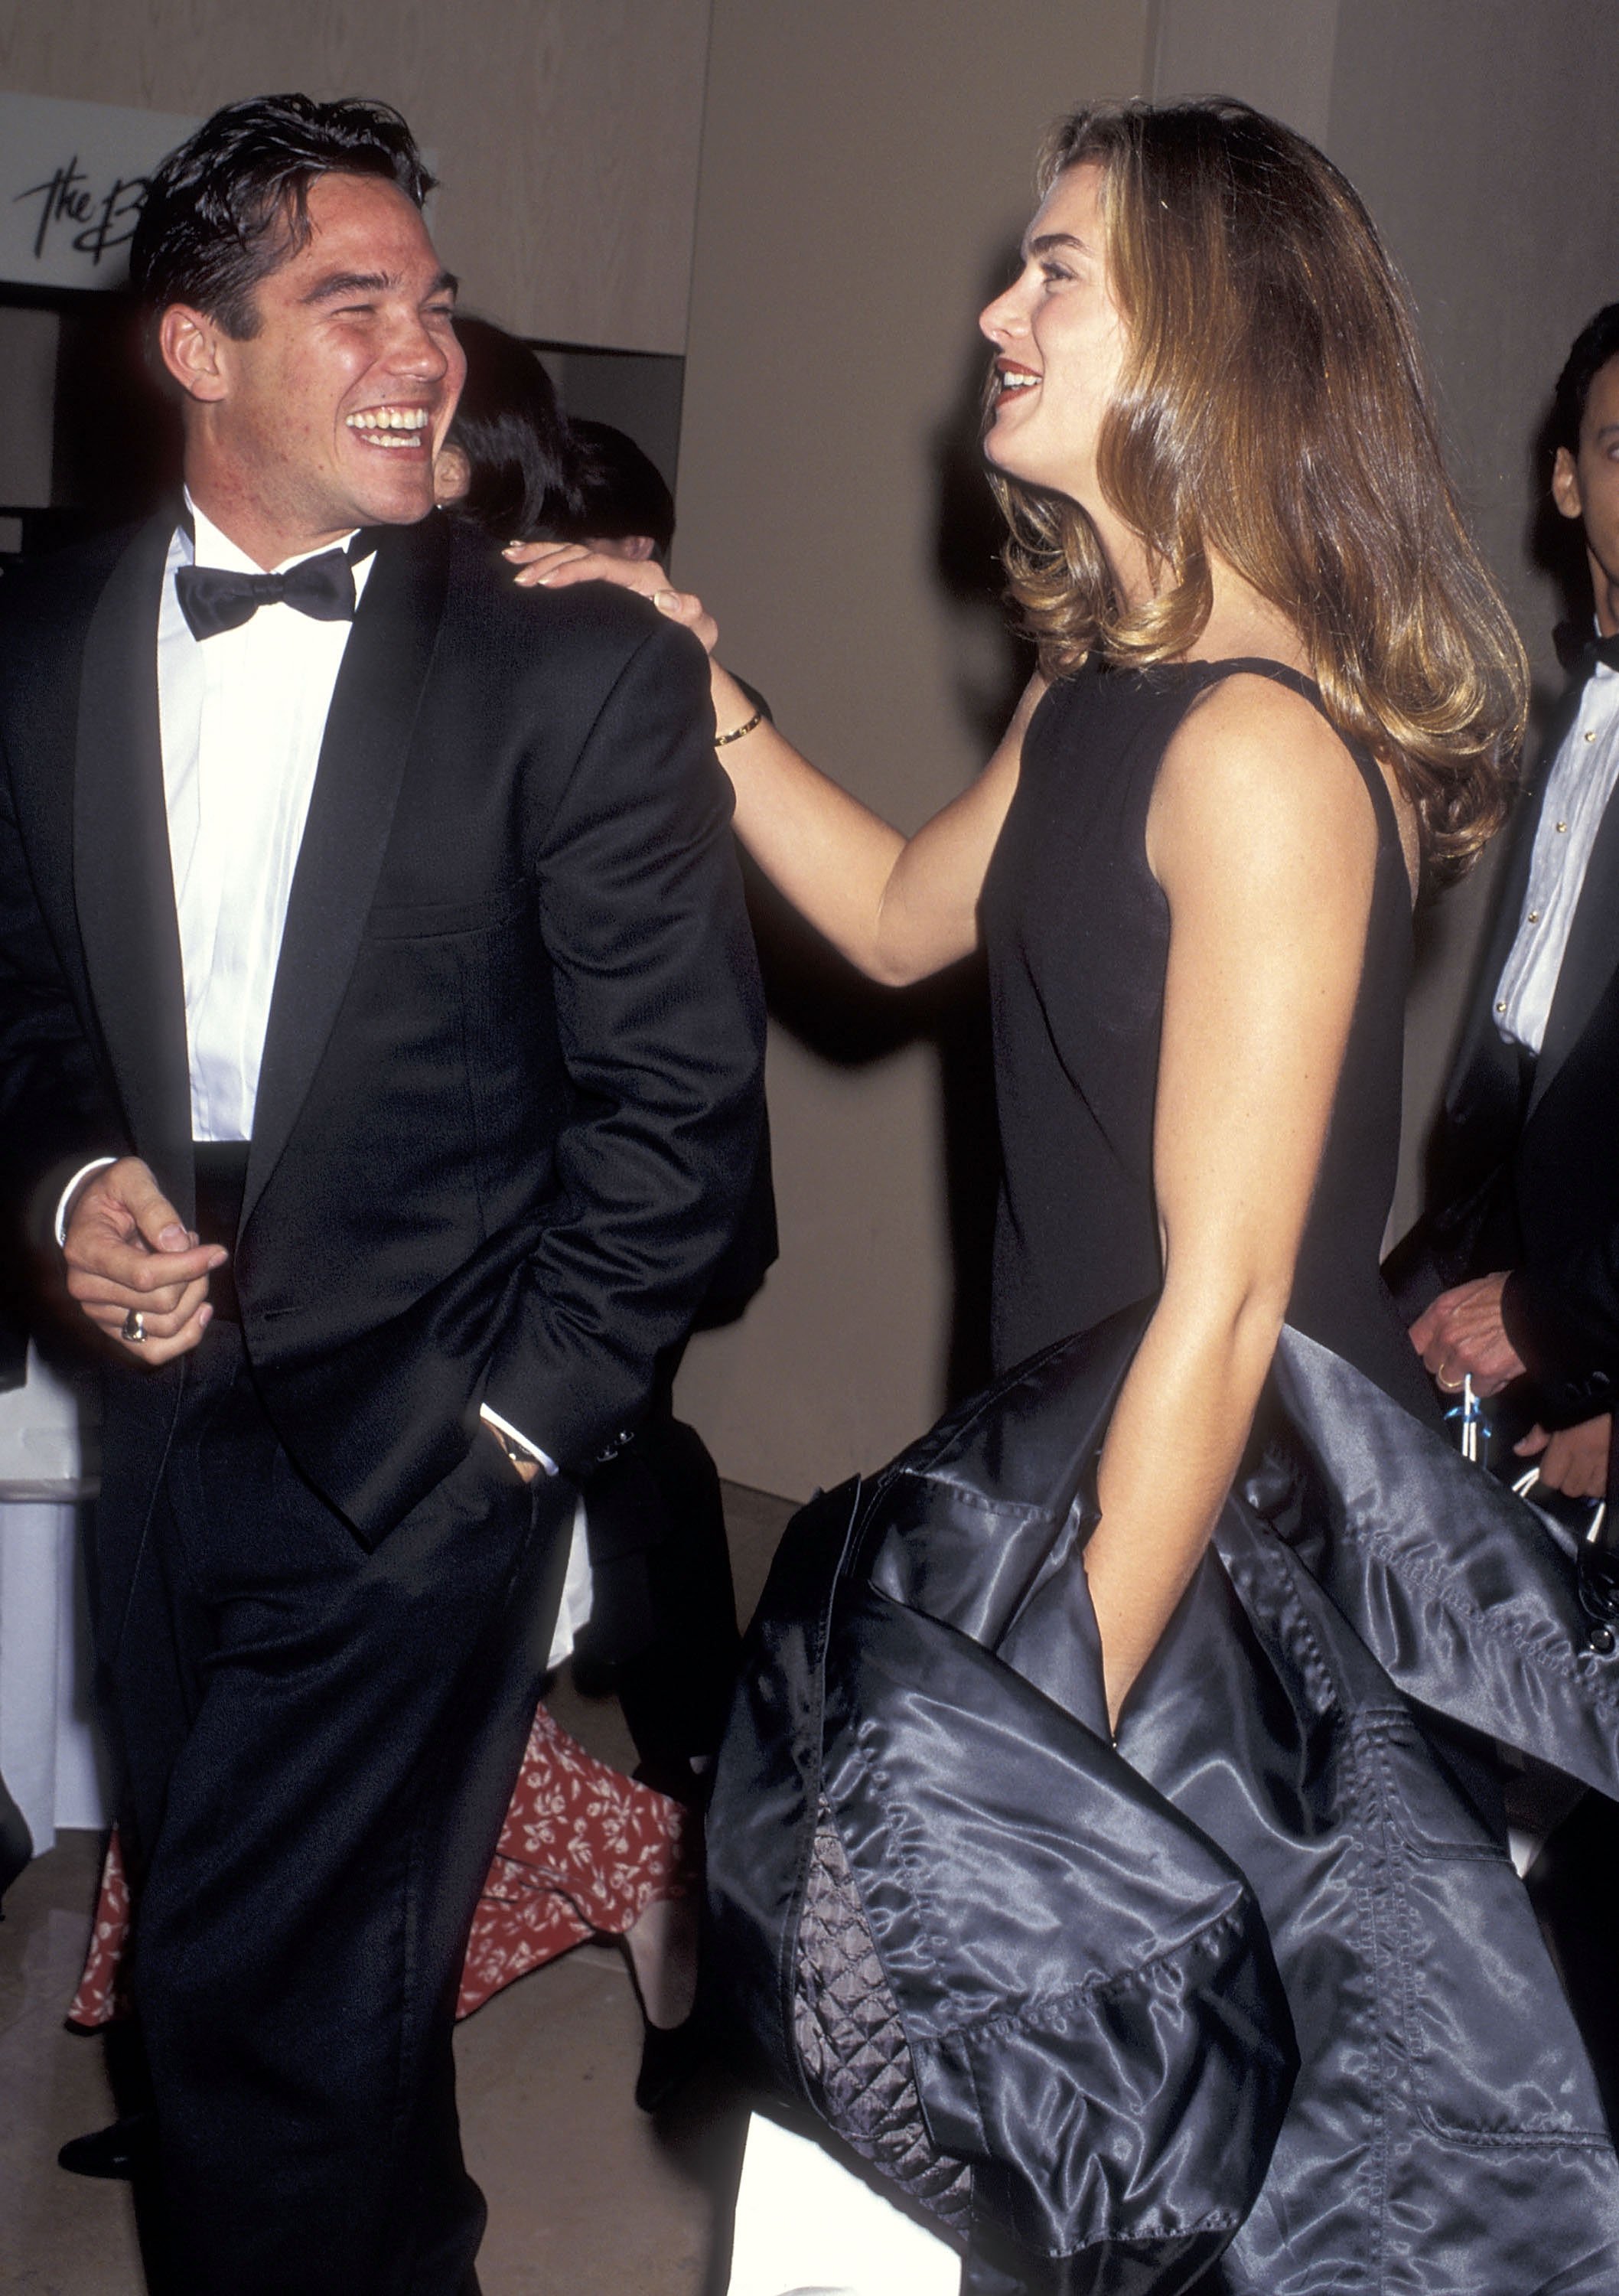 Actor Dean Cain and his girlfriend Brooke Shields during the National Conference of Christians And Jews' 32nd Annual Humanitarian Award Salute to Robert Iger at the Beverly Hilton Hotel on November 9, 1995 in Beverly Hills, California. / Source: Getty Images